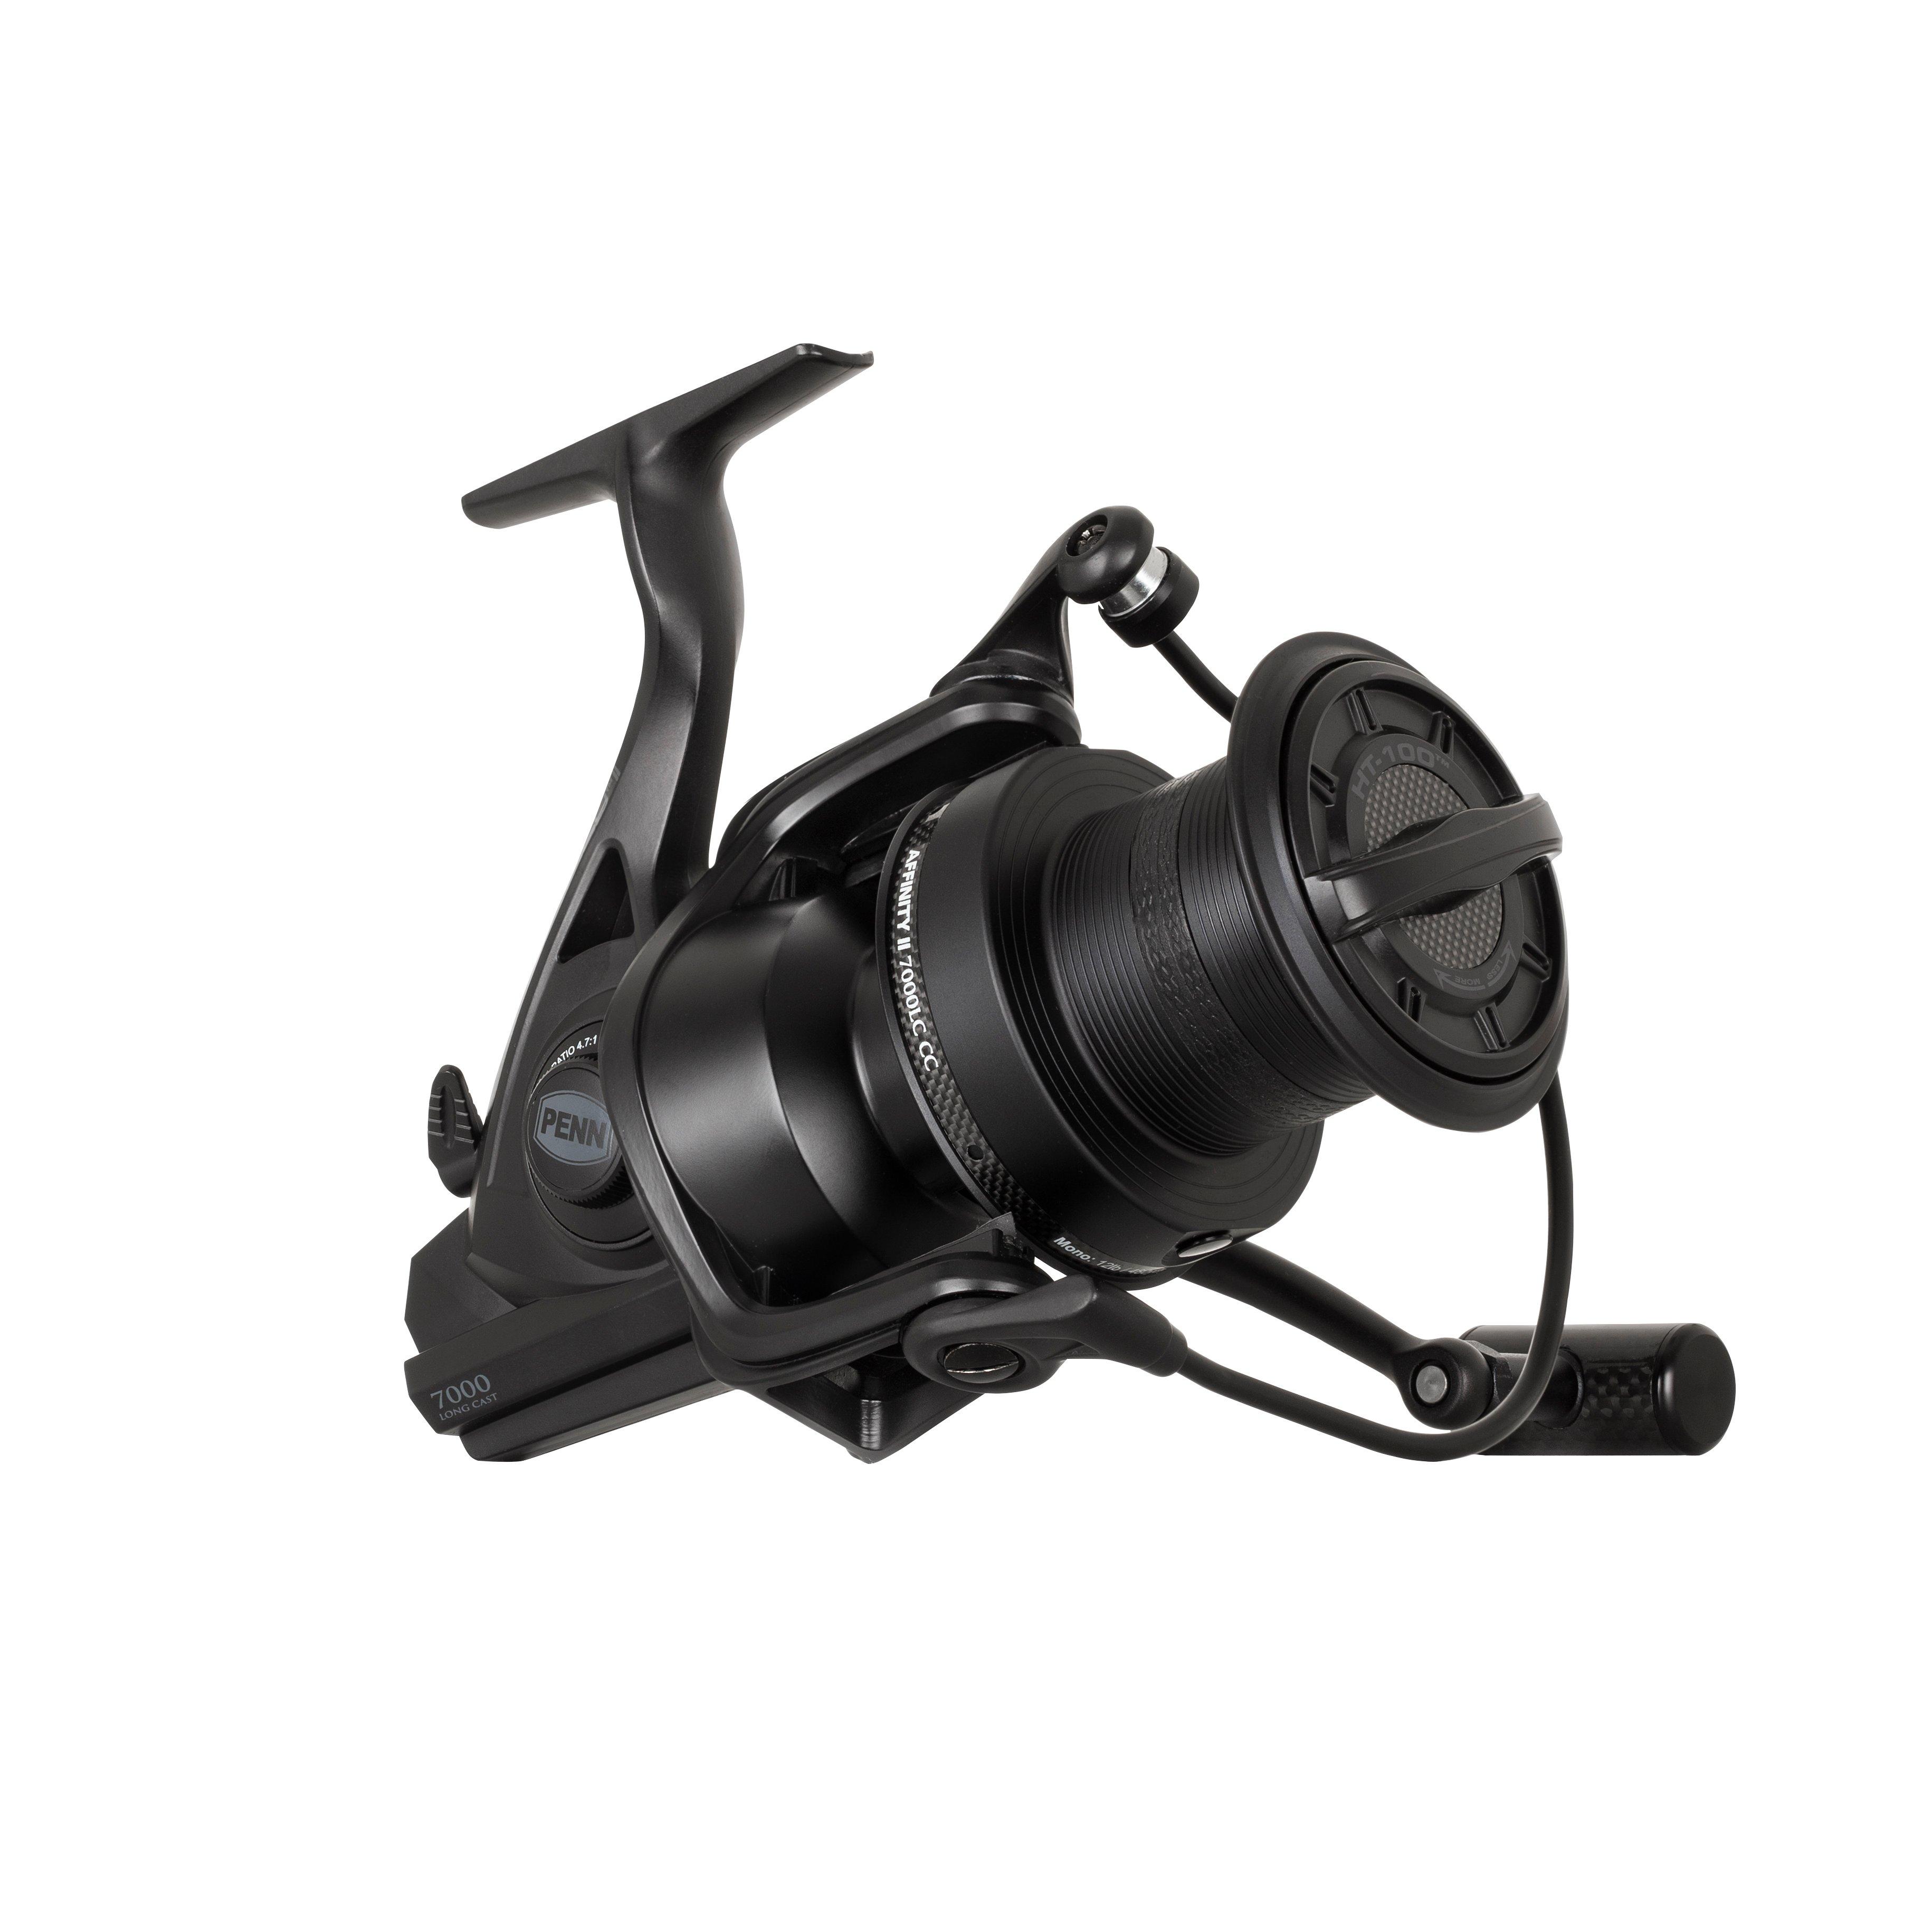 Birds Tackle fishing Store - The Rolls Royce of sea fishing reels! 💯 🎣  The PENN Surfblaster III is a fantastic and fully salt water resistant longcast  reel 🤩 equipped with the